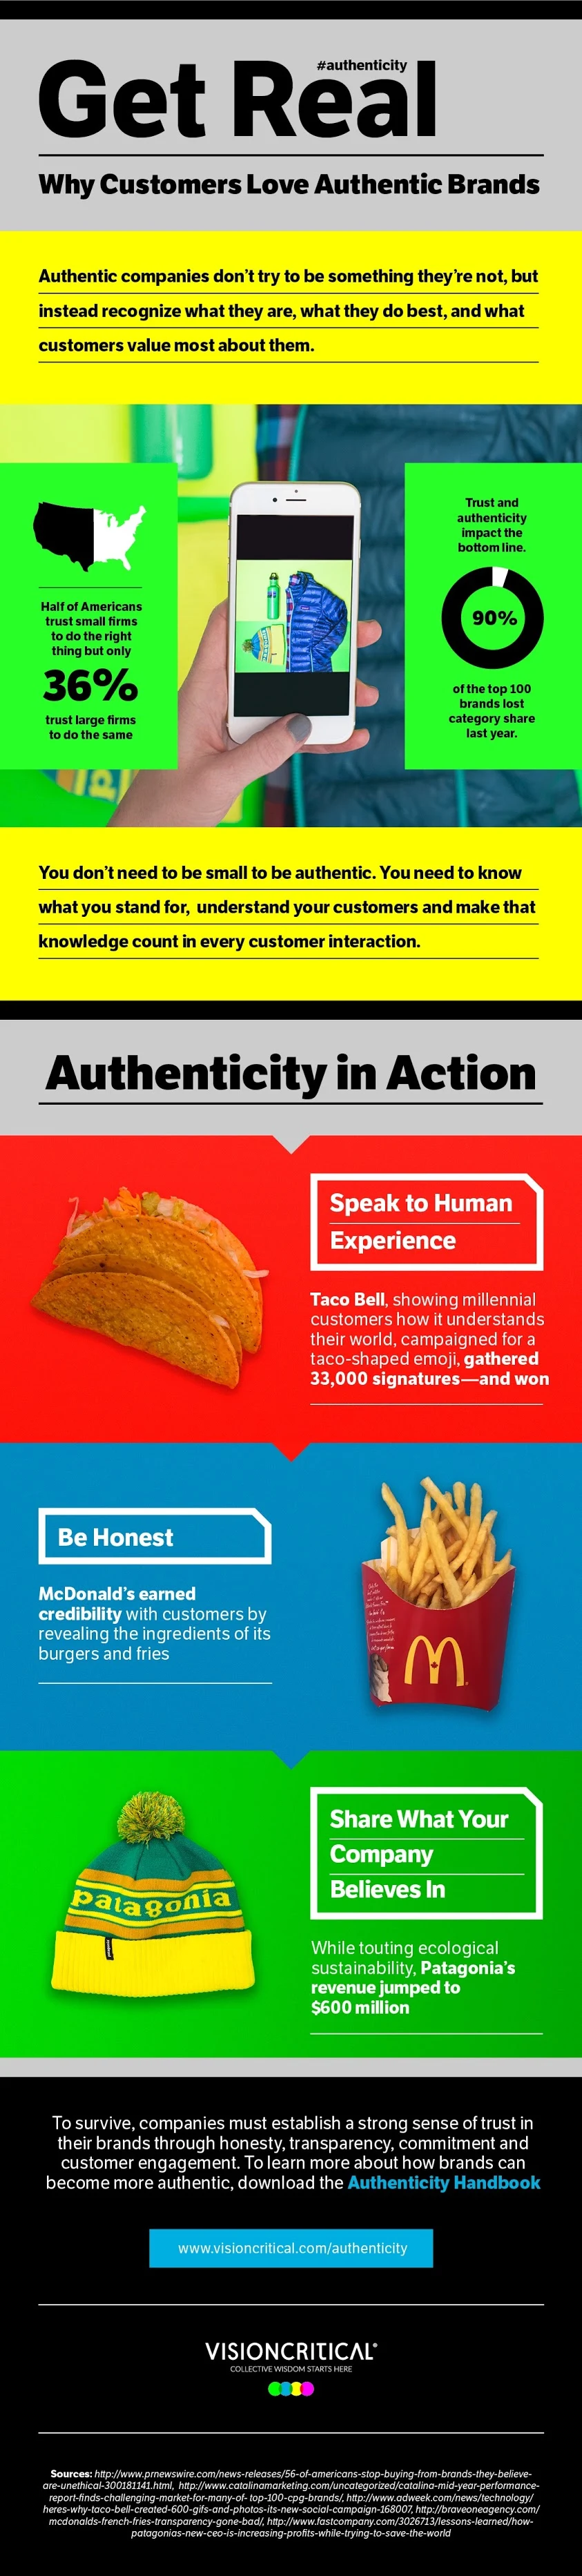 Why Customers Love Authentic Brands - infographic